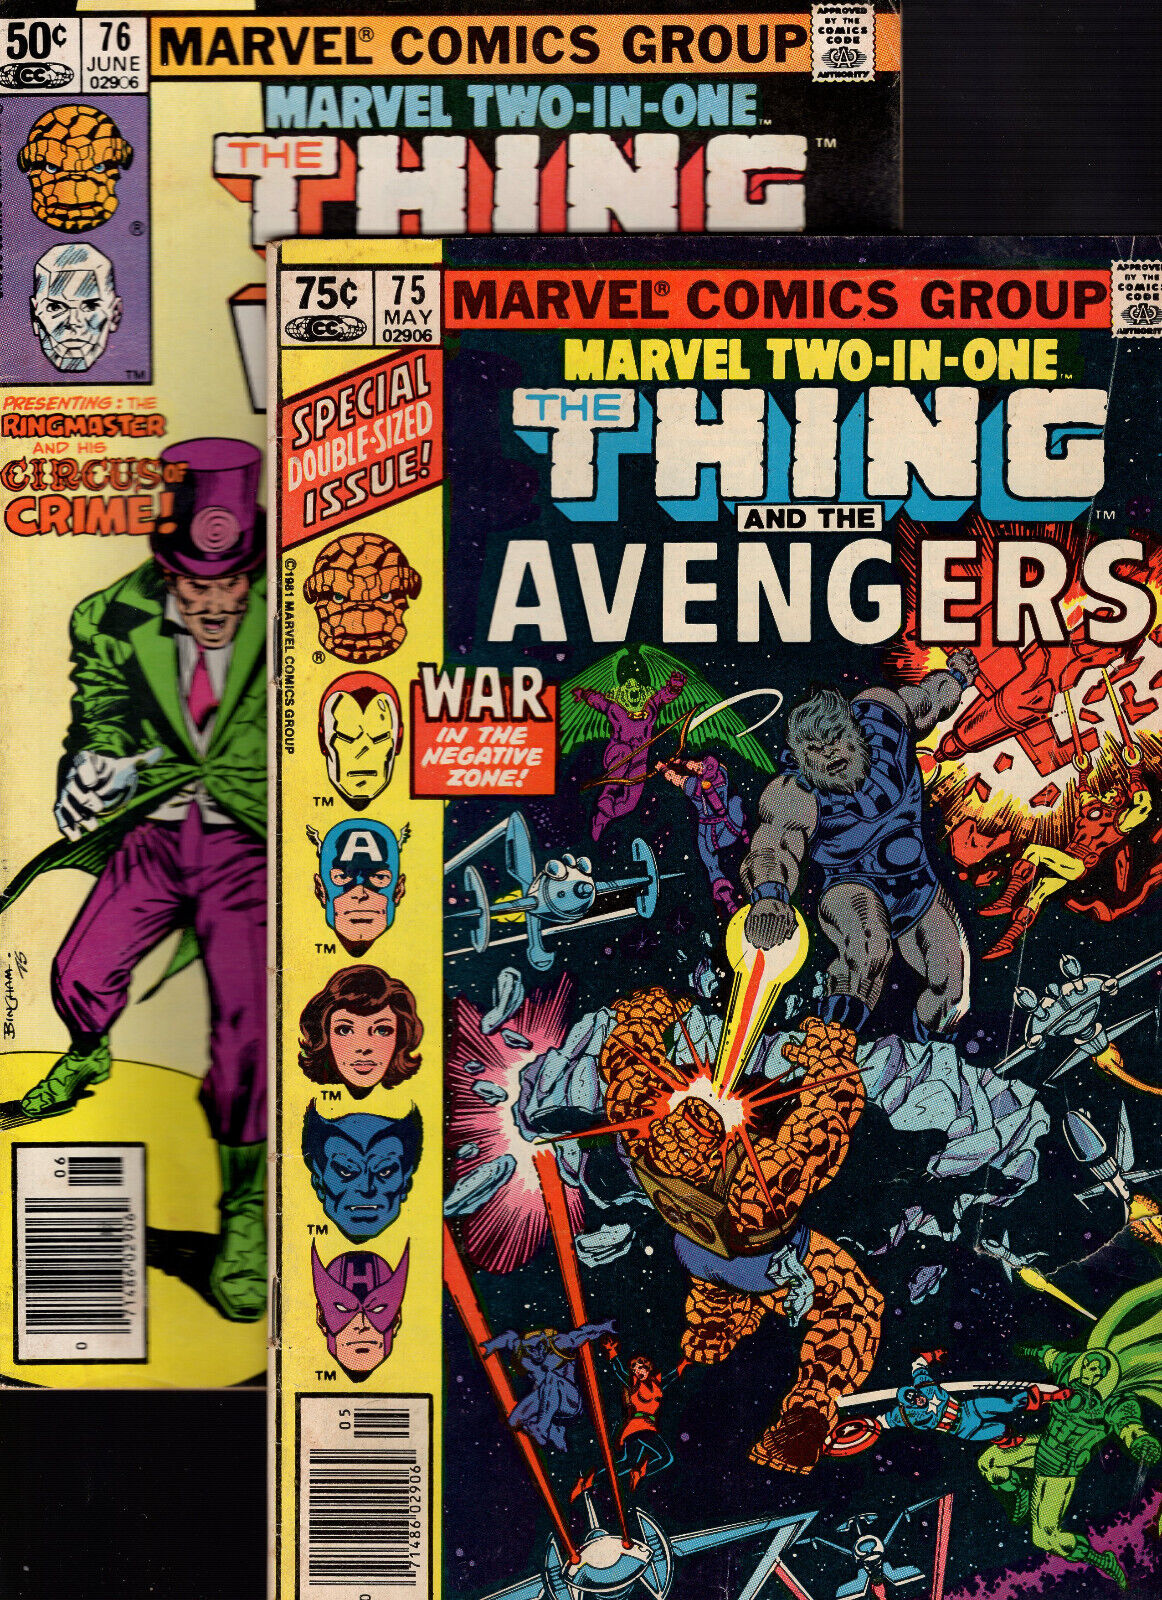 Marvel Two-In-One #75 & #76 (1981, Marvel Comics)